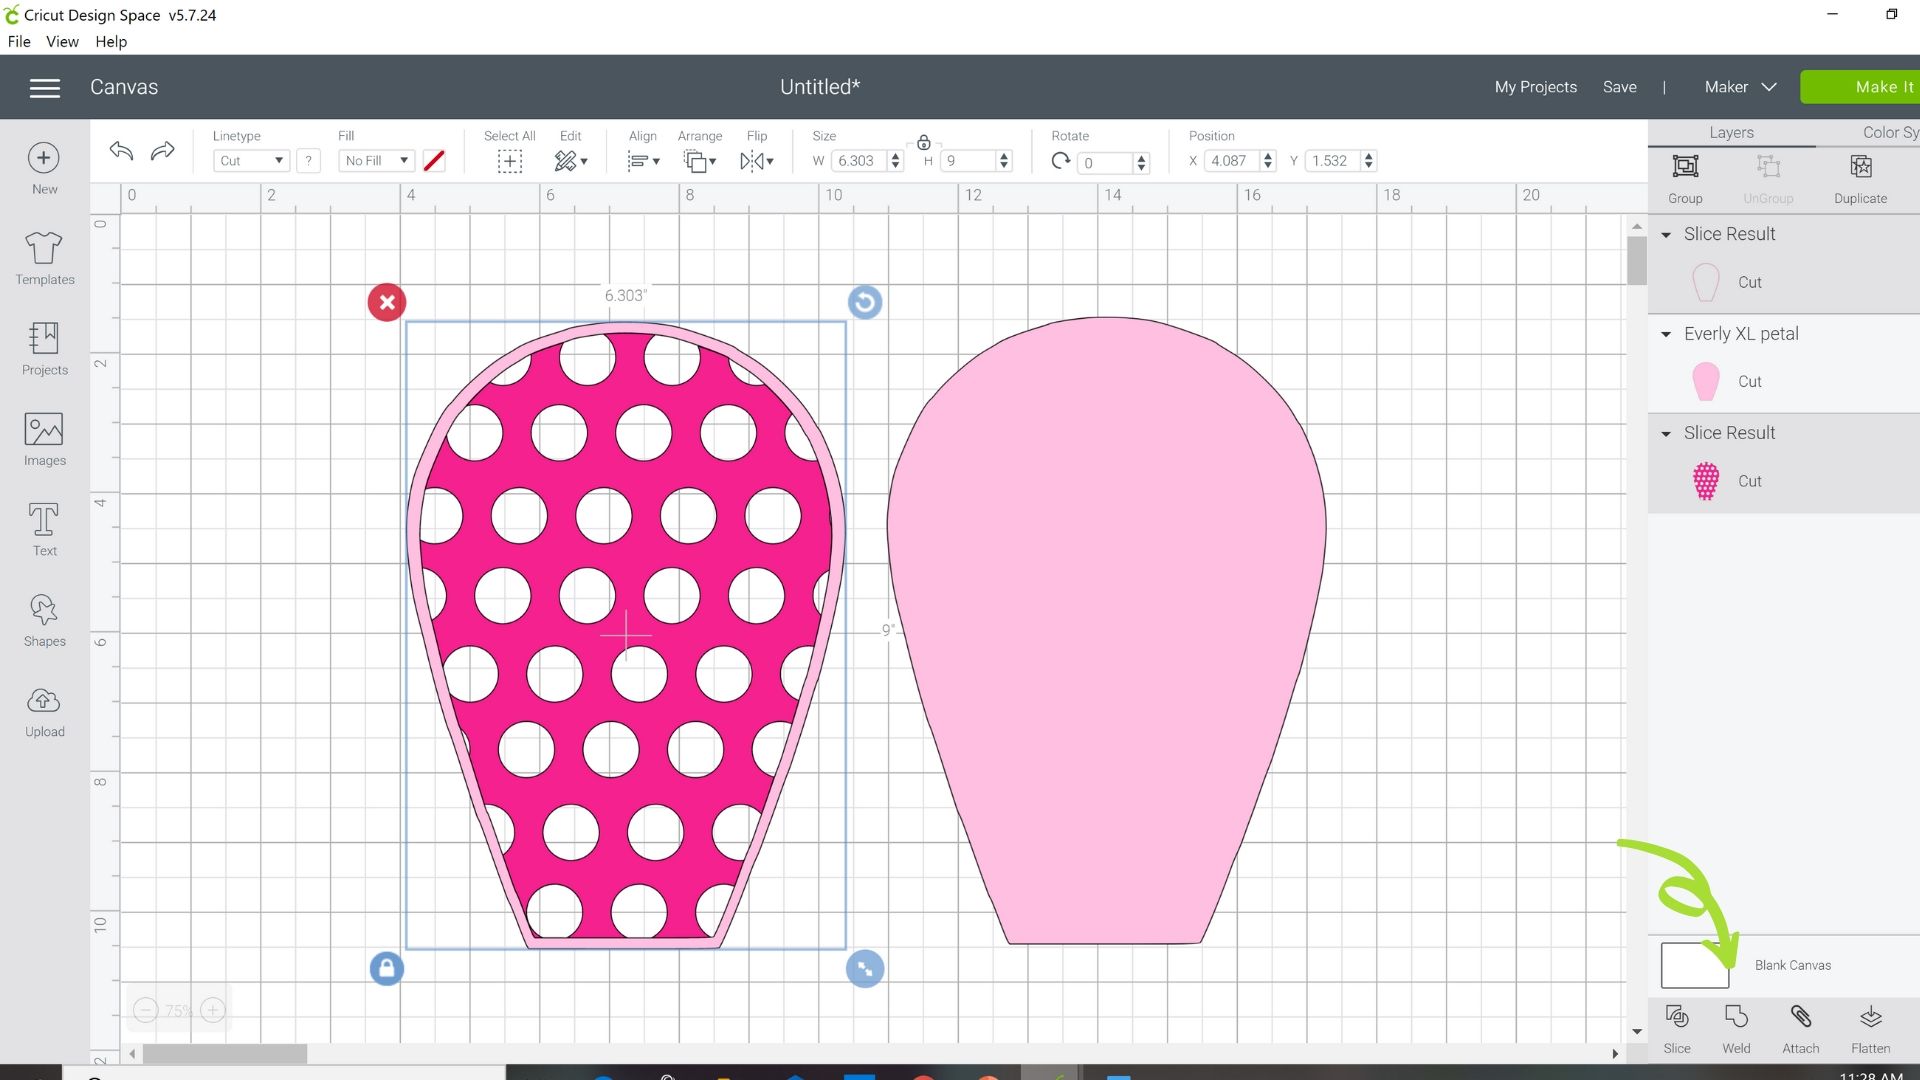 A design space screenshot with two flower petal shaped designs; one a darker pink polka dot petal, and the second a plain light pink petal.